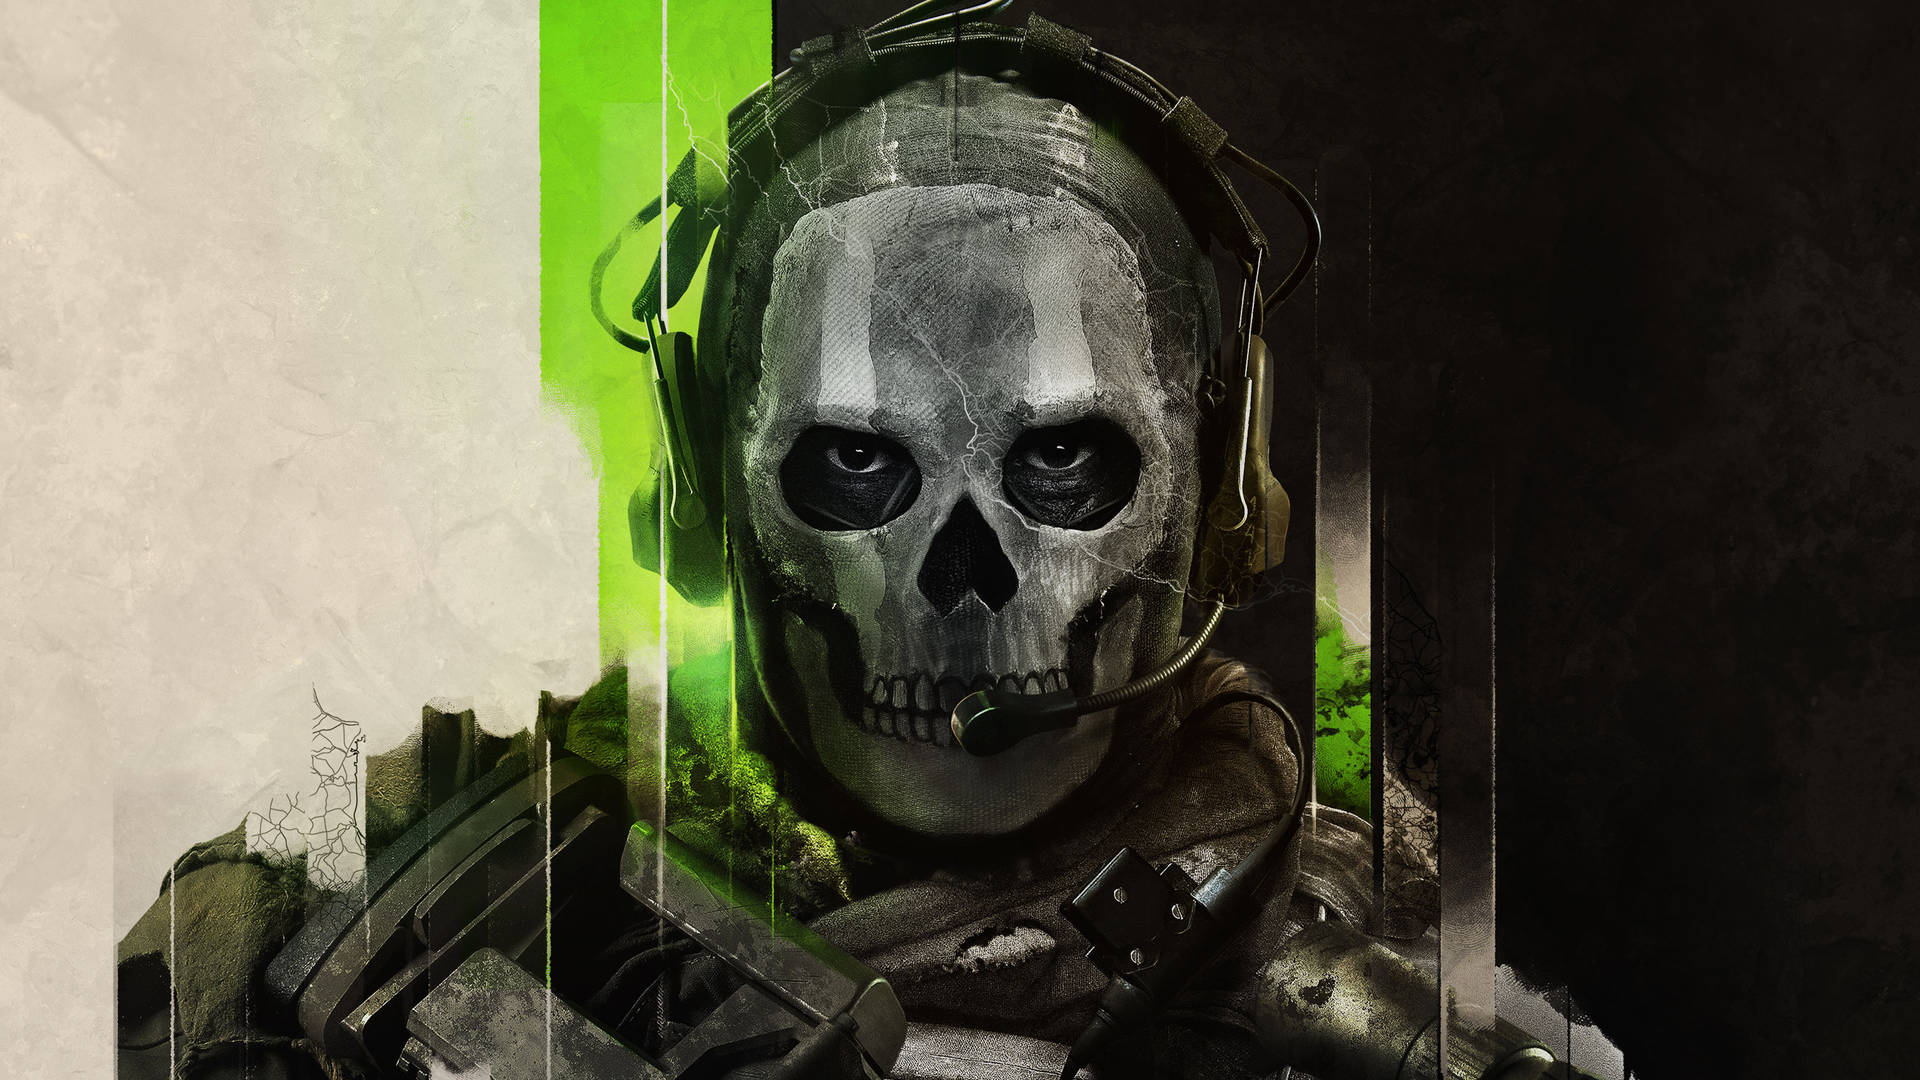 Free Call Of Duty Wallpaper Downloads 300 Call Of Duty Wallpapers for  FREE  Wallpaperscom